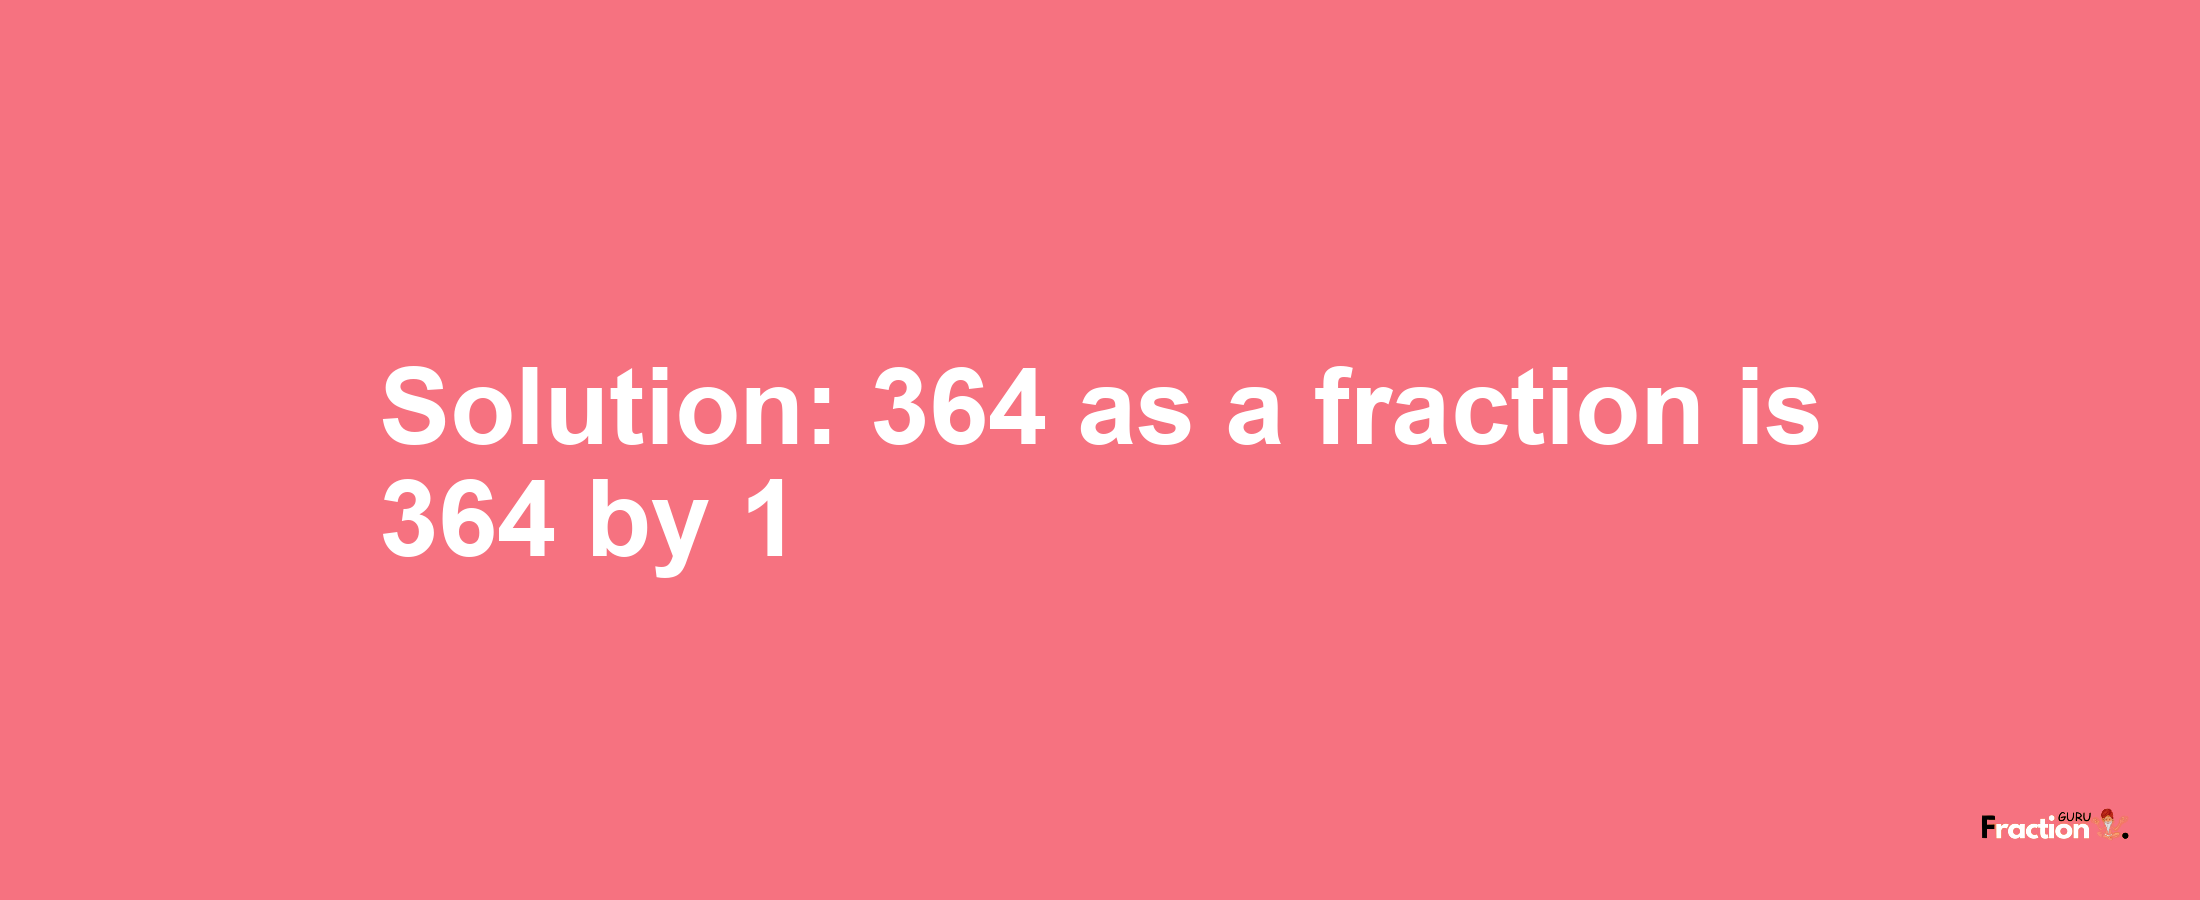 Solution:364 as a fraction is 364/1